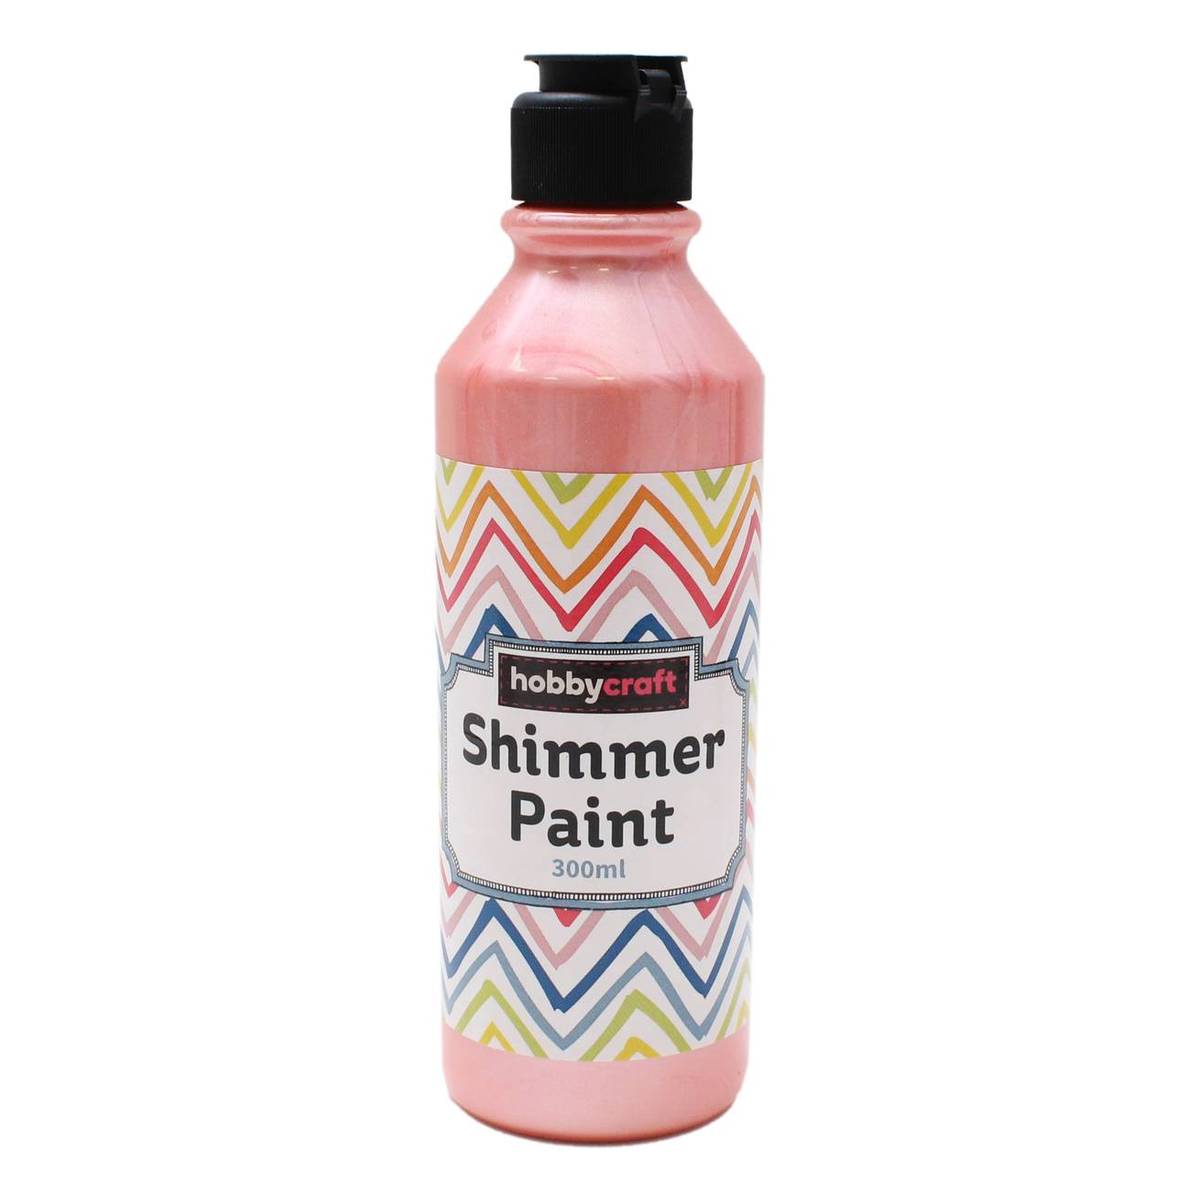 PEARLISED SHIMMER WHITE,SILVER,LILAC & PINK SPRAY PAINT HOBBY CRAFTS & ART  400ML